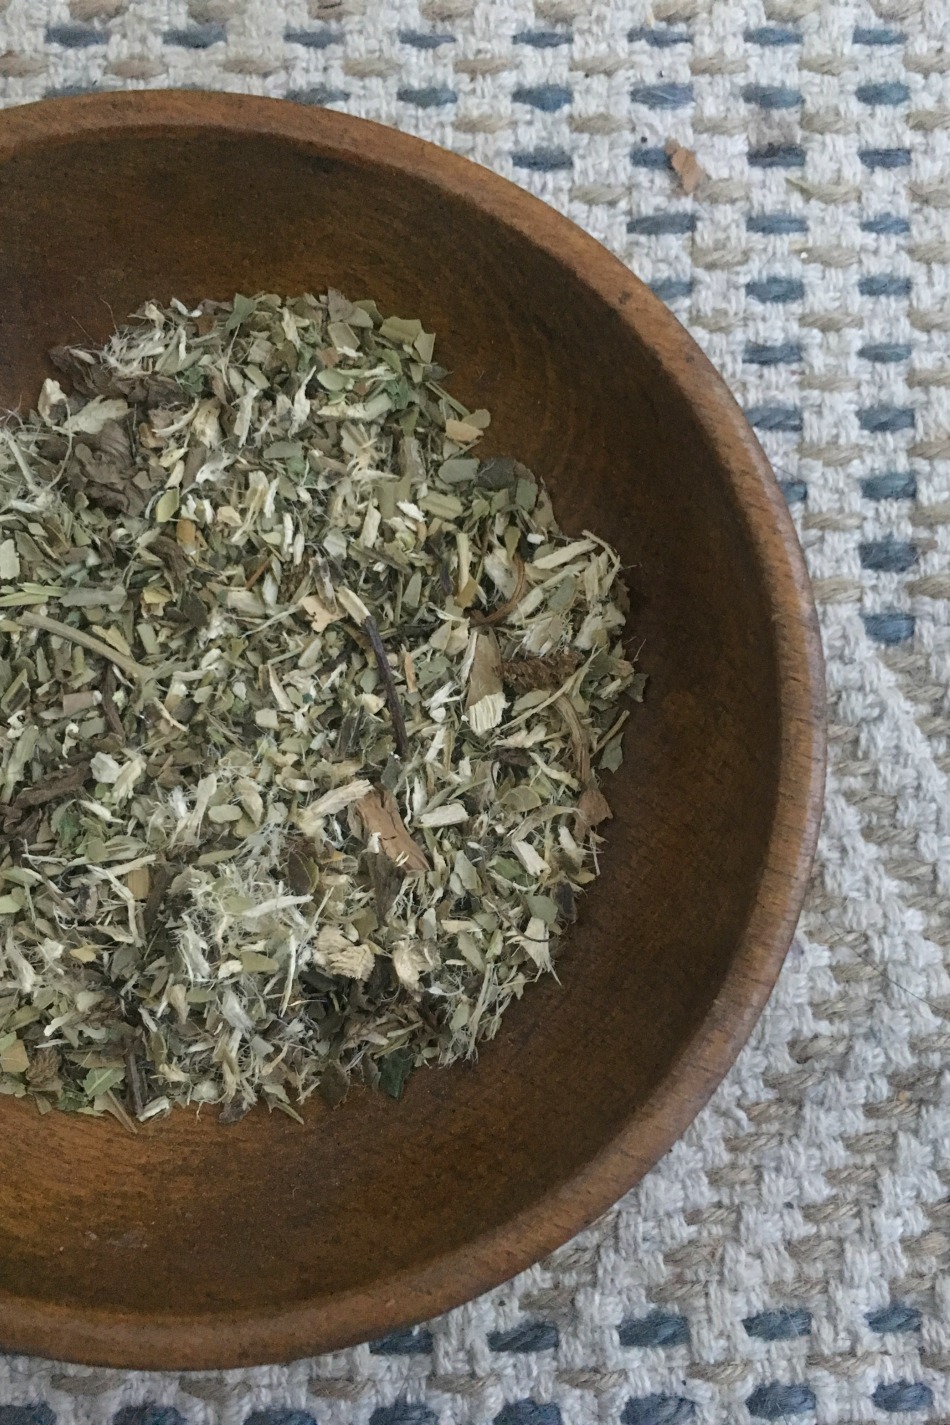 How To Decrease Your Chance Of A Sinus Infection With An Herbal Sinus Rinse | Growing Up Herbal | If sinus issues are a common occurrence for you, here’s an herbal remedy that can offer you some much needed relief.